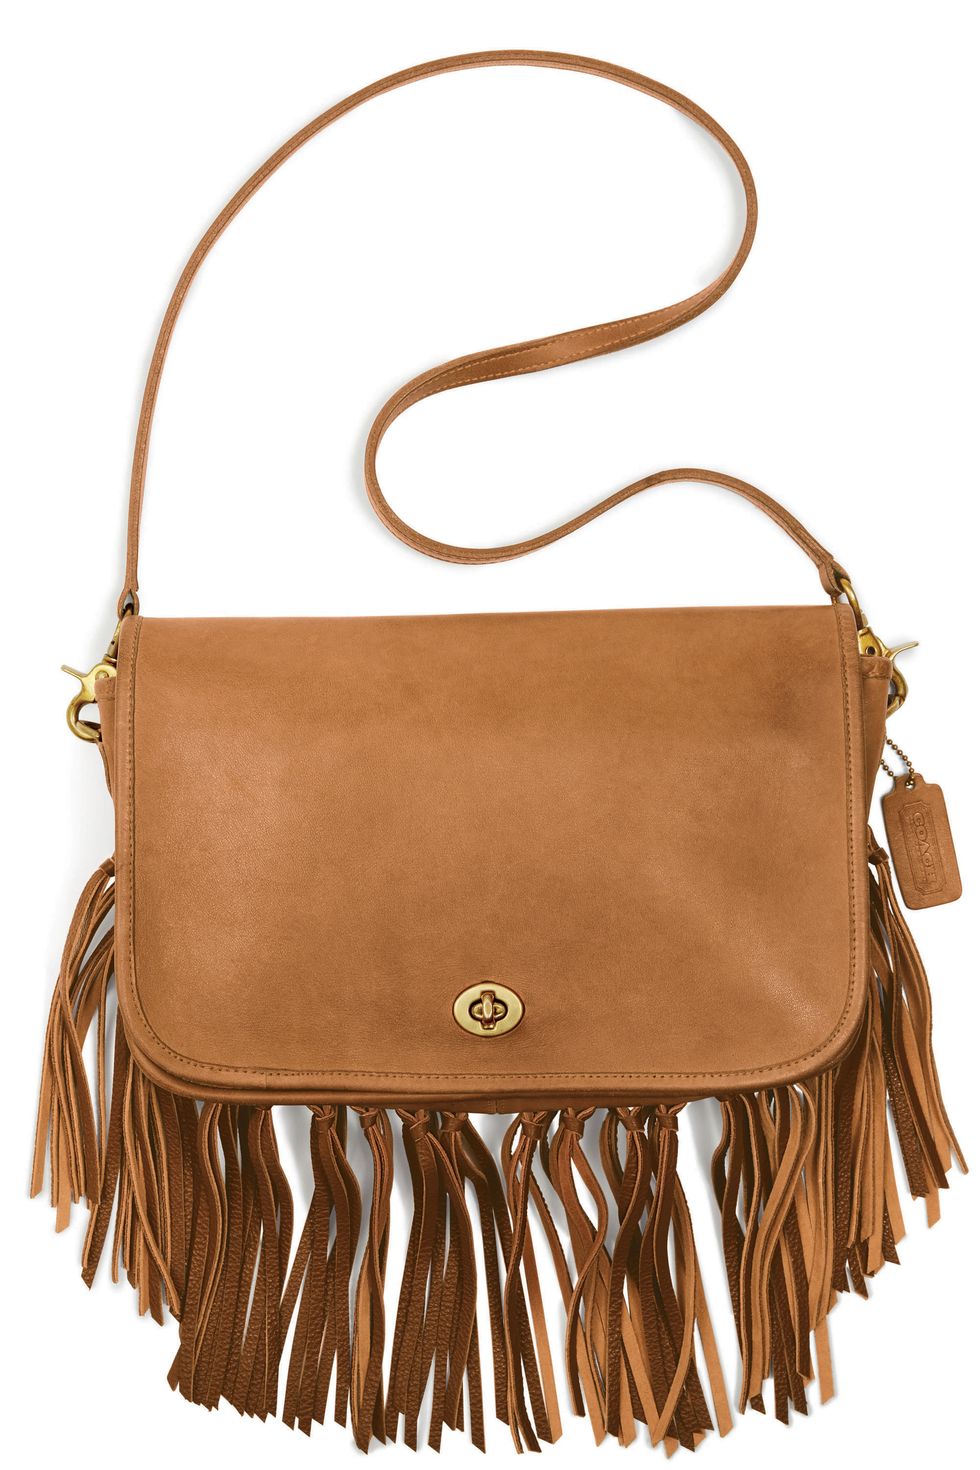 Coach 75TH Anniversary Re-Edition Penny Black and Tan Crossbody - $163 -  From Lolas